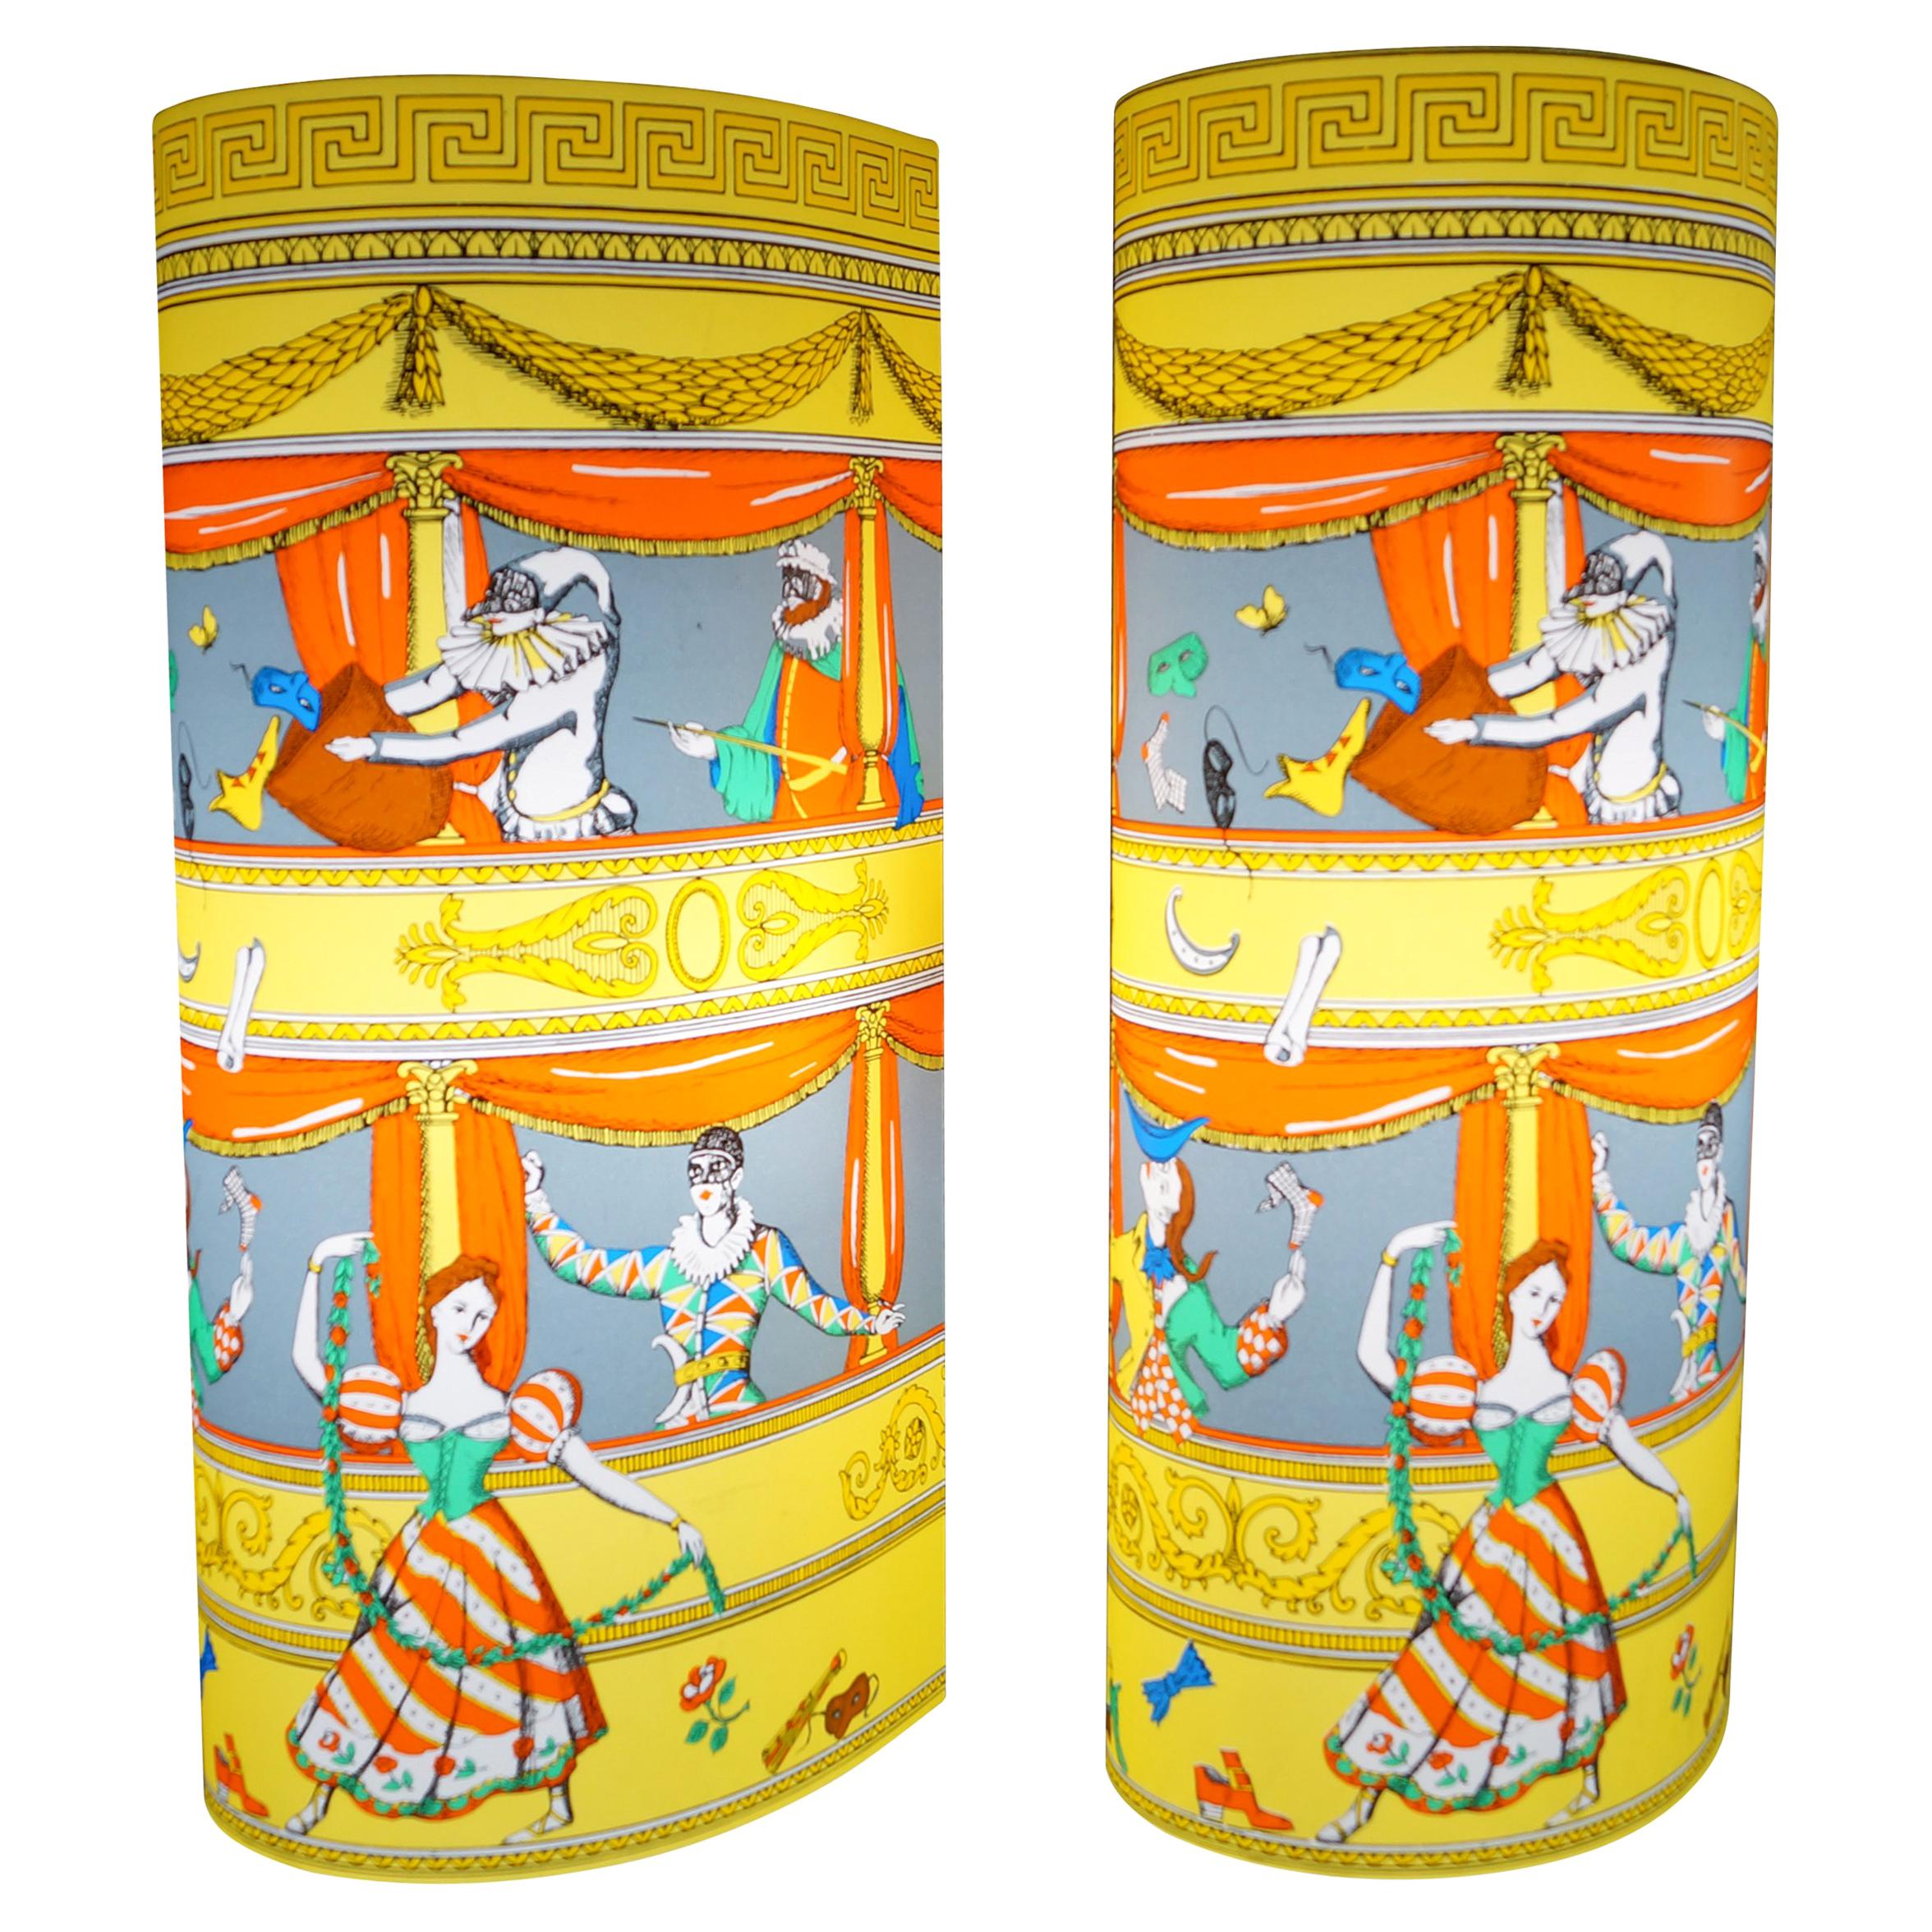 Perspex Table Lamps Pair by Barnaba Fornasetti "Commedia Italiano Media", 1995 For Sale